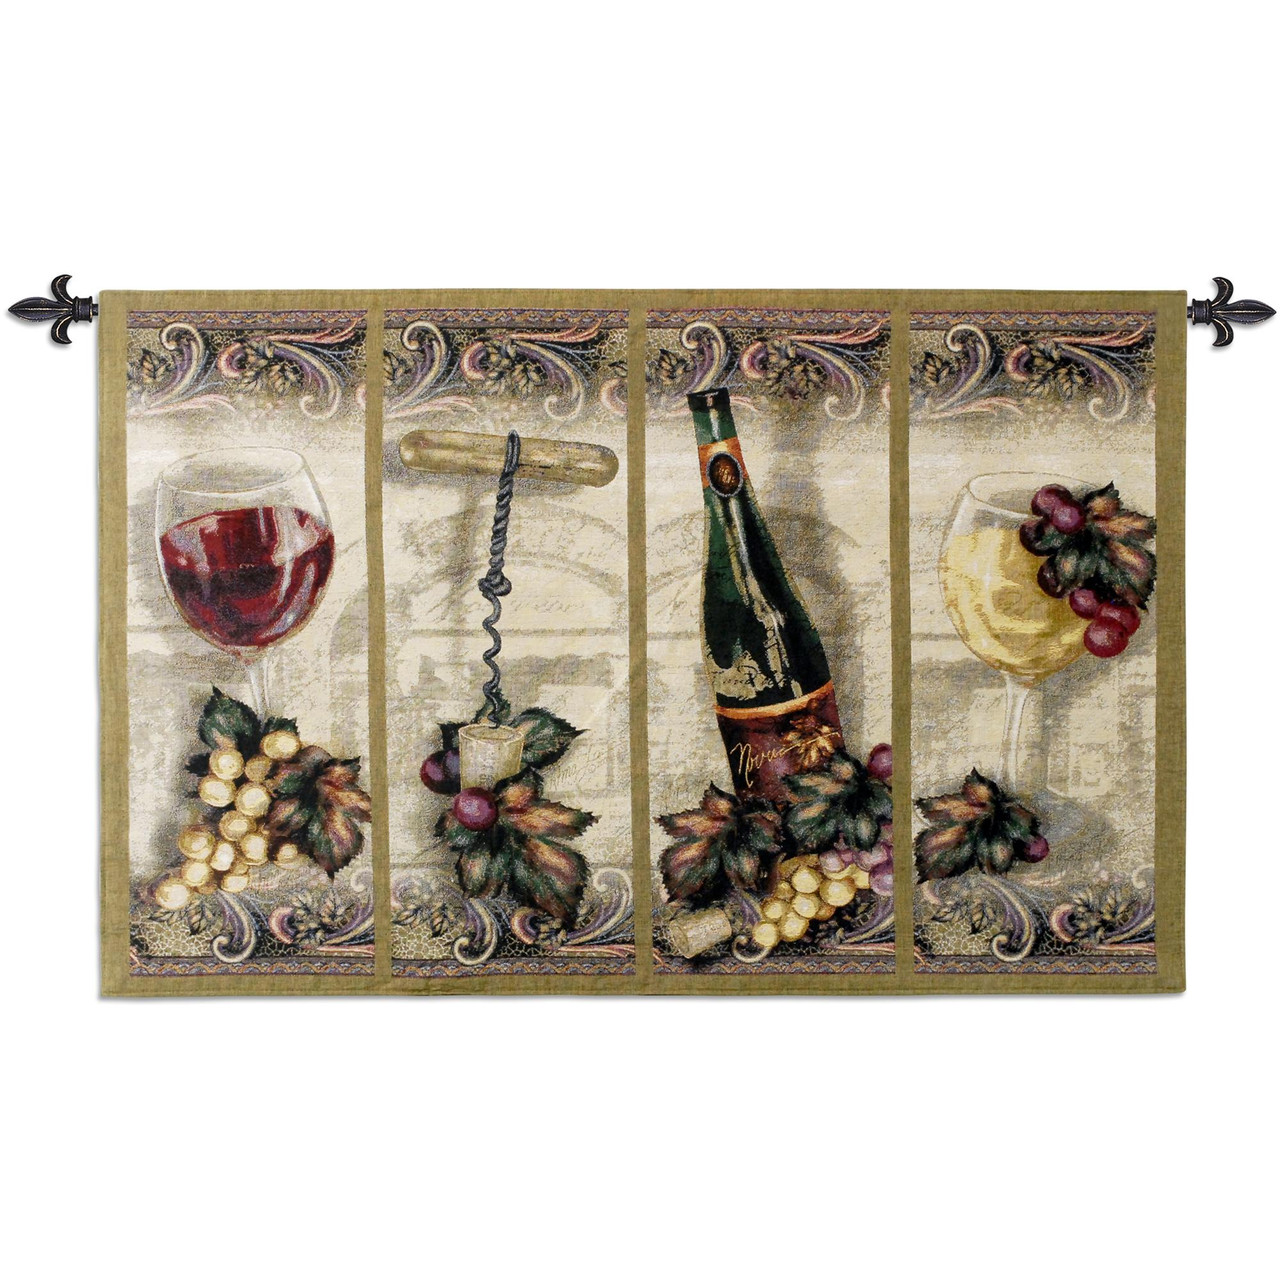 Nouveau Wine Woven Tapestry Wall Art Hanging Scrolled Panel Wine  Artwork – Great for Wine Cellar 100% Cotton USA Size 53x35